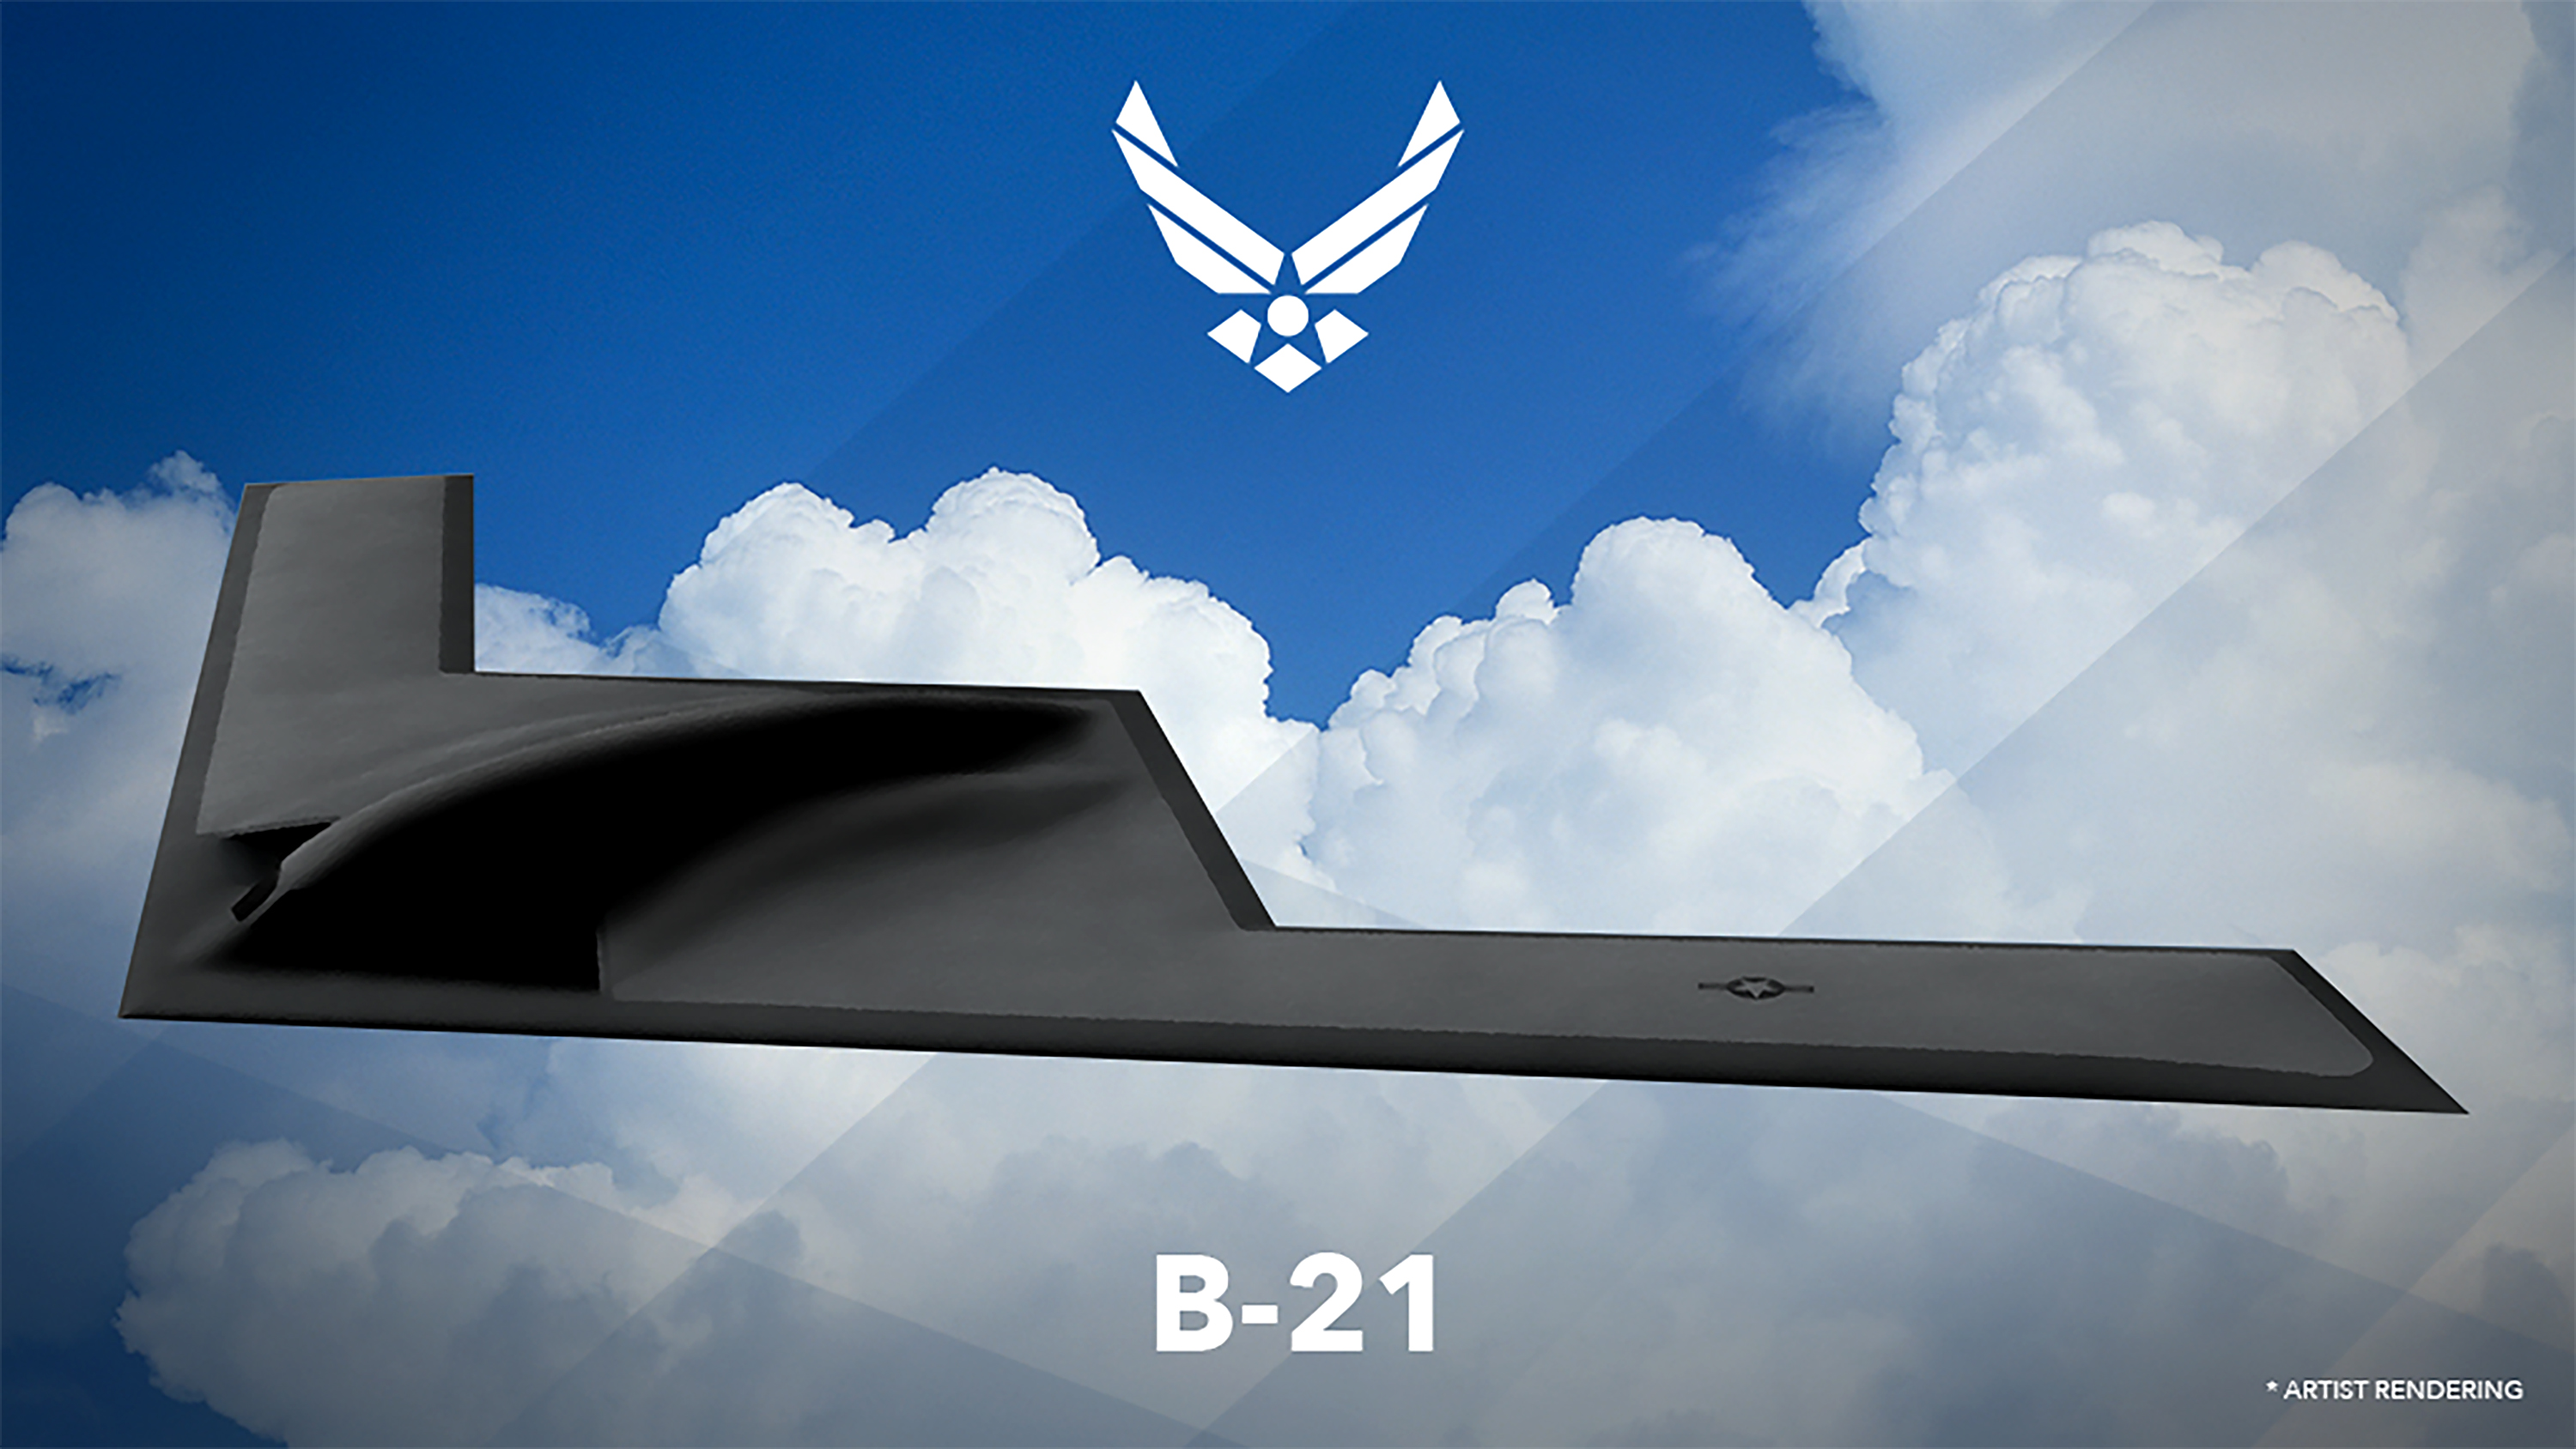 B-21 bomber finishes preliminary design review, and Air Force official